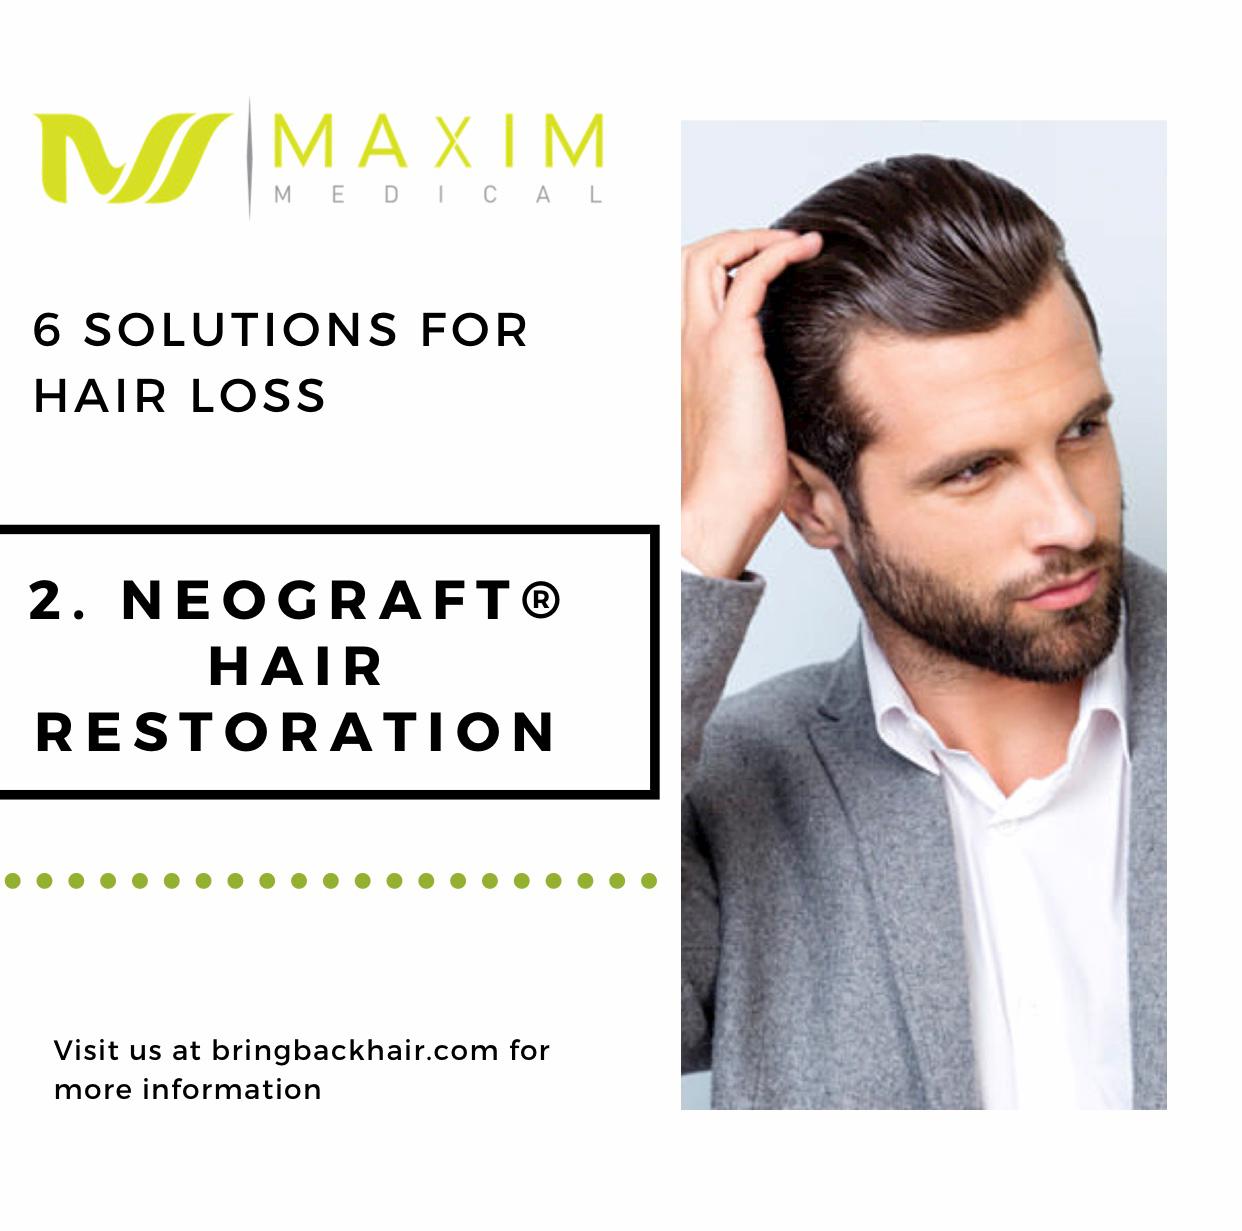 6 Solutions For Hair Loss

2. NeoGraft Hair Restoration
The main goal of Neograft Hair Restoration is natural results with no detectable sign of a procedure having been done. Using the hair on the back of the patient’s scalp, a certified NeoGraft provider carefully extracts follicles individually instead of Strip Harvesting. These follicles are removed with a gentle process collected pneumatically. After the desired amount of grafts are collected, the Neograft “No Touch” Follicle Implantation begins. This method involved careful placement of the hair follicles into the scalp area.

Implantation continues until all the hair follicles have been transplanted. These new transplanted follicles will rest and then regrow, thus resulting in a natural-appearing, full head of hair.